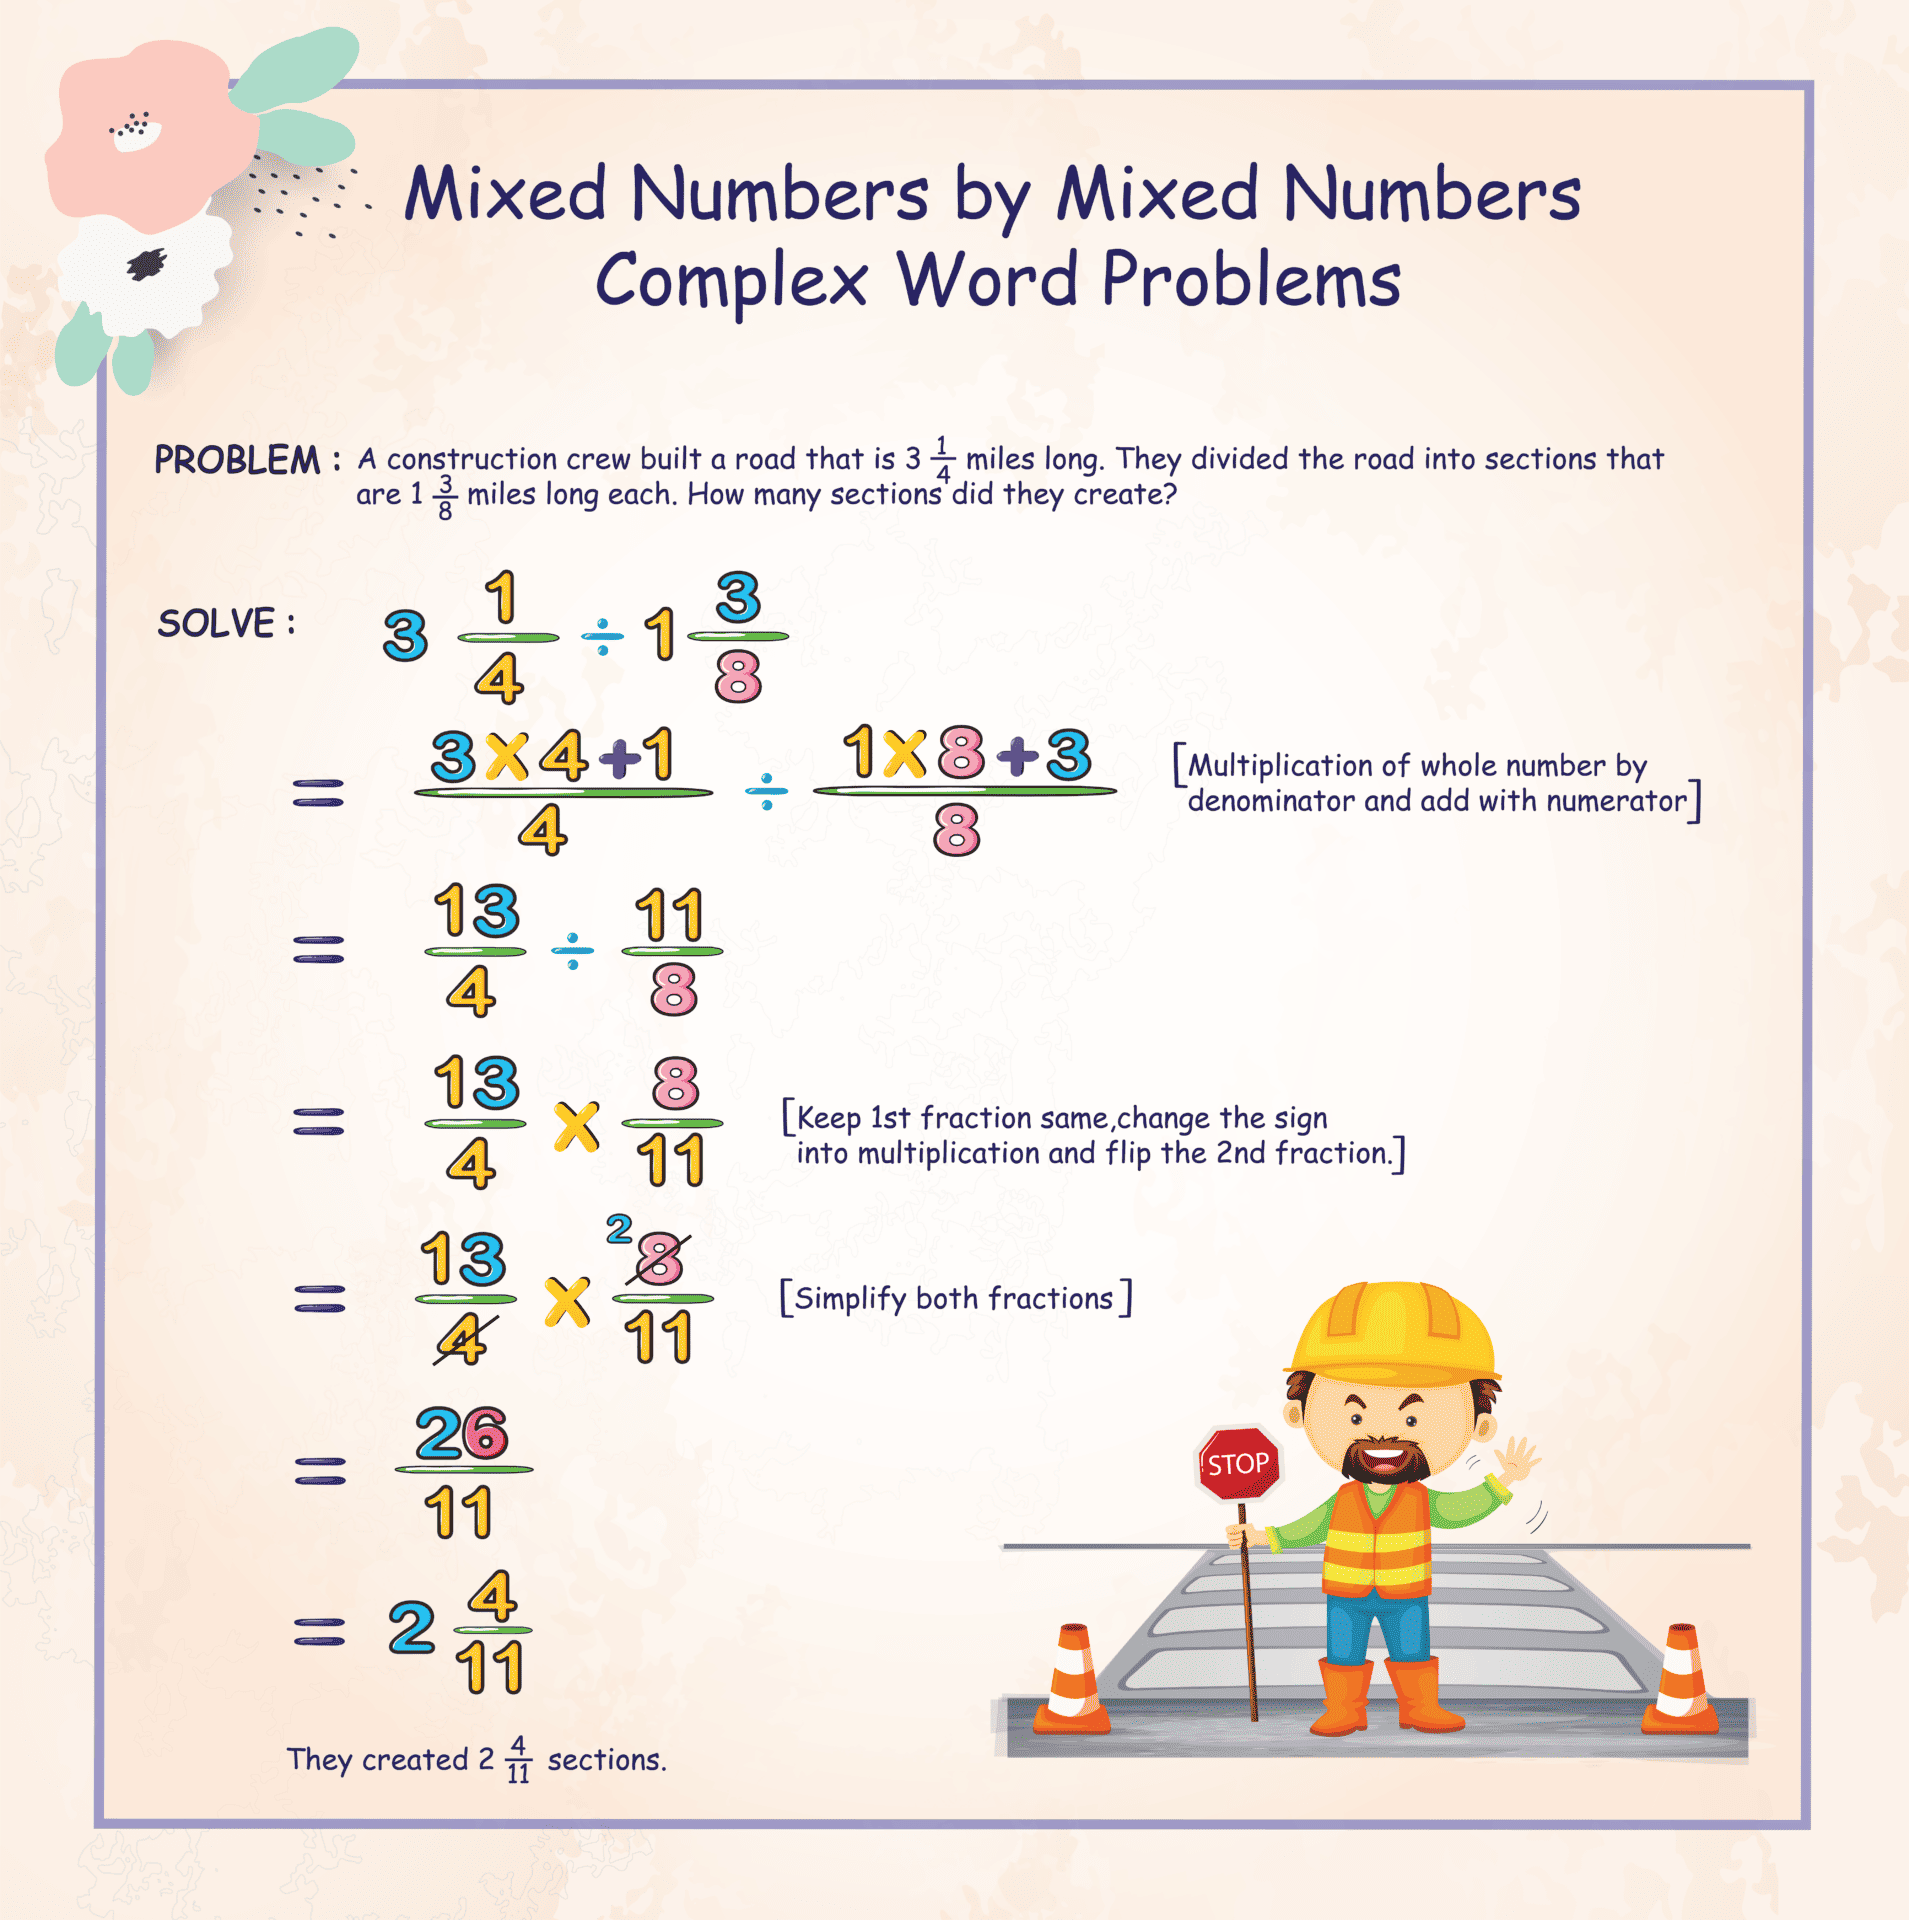 Mixed numbers by mixed numbers complex word problems